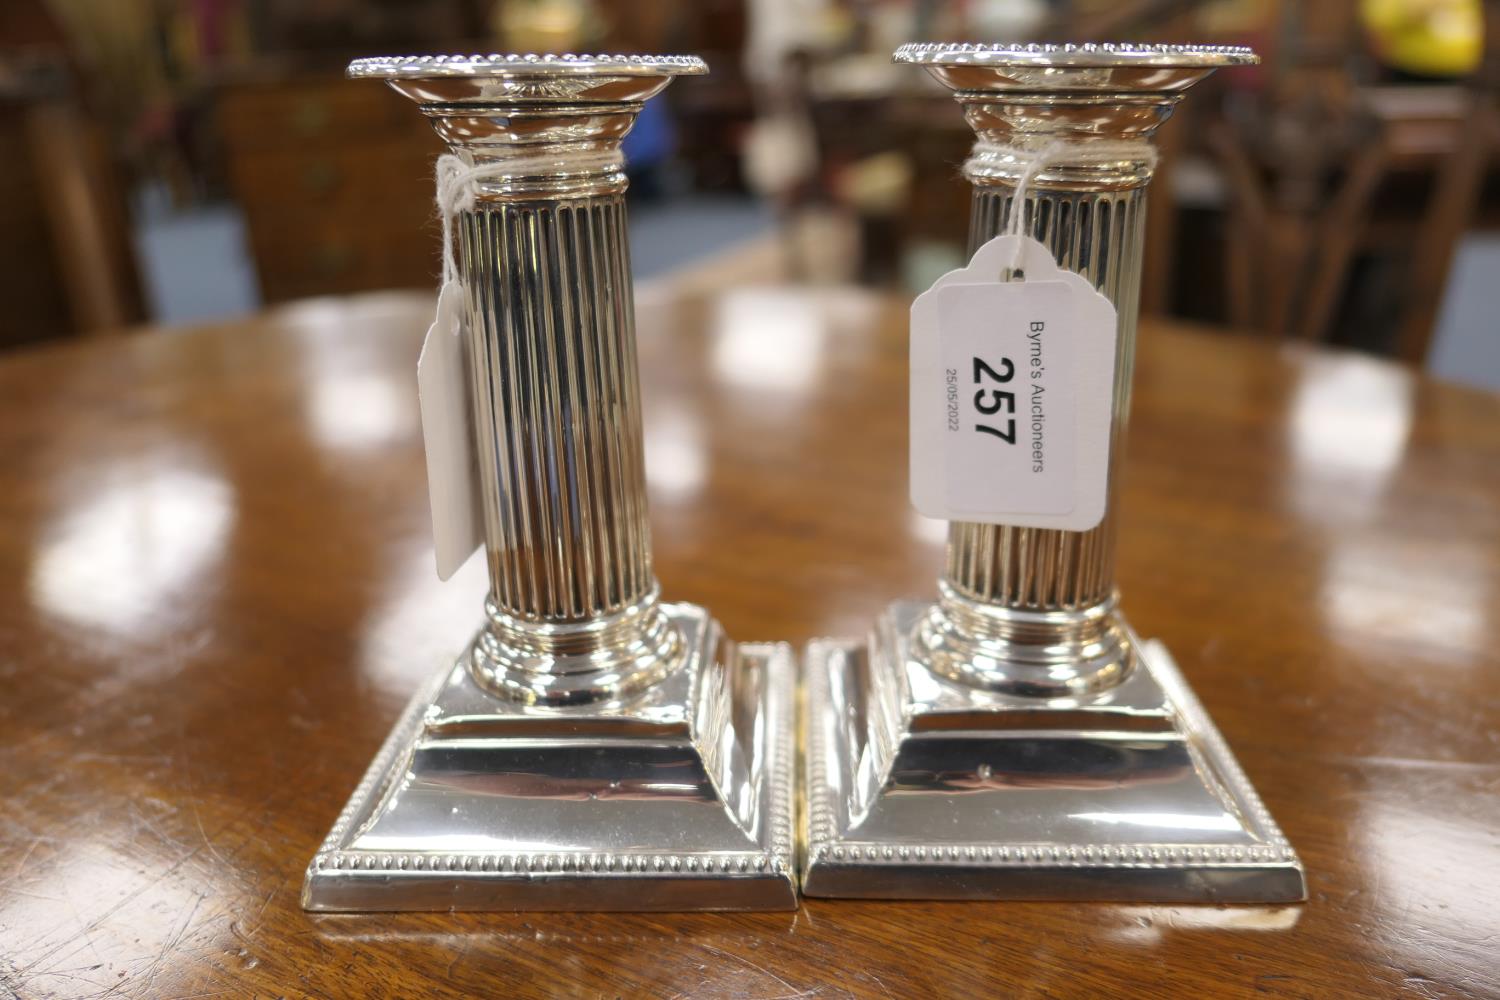 Pair of silver dwarf candlesticks, by William Hutton & Sons, London 1900/01 (loaded), height 13.5cm - Image 2 of 9